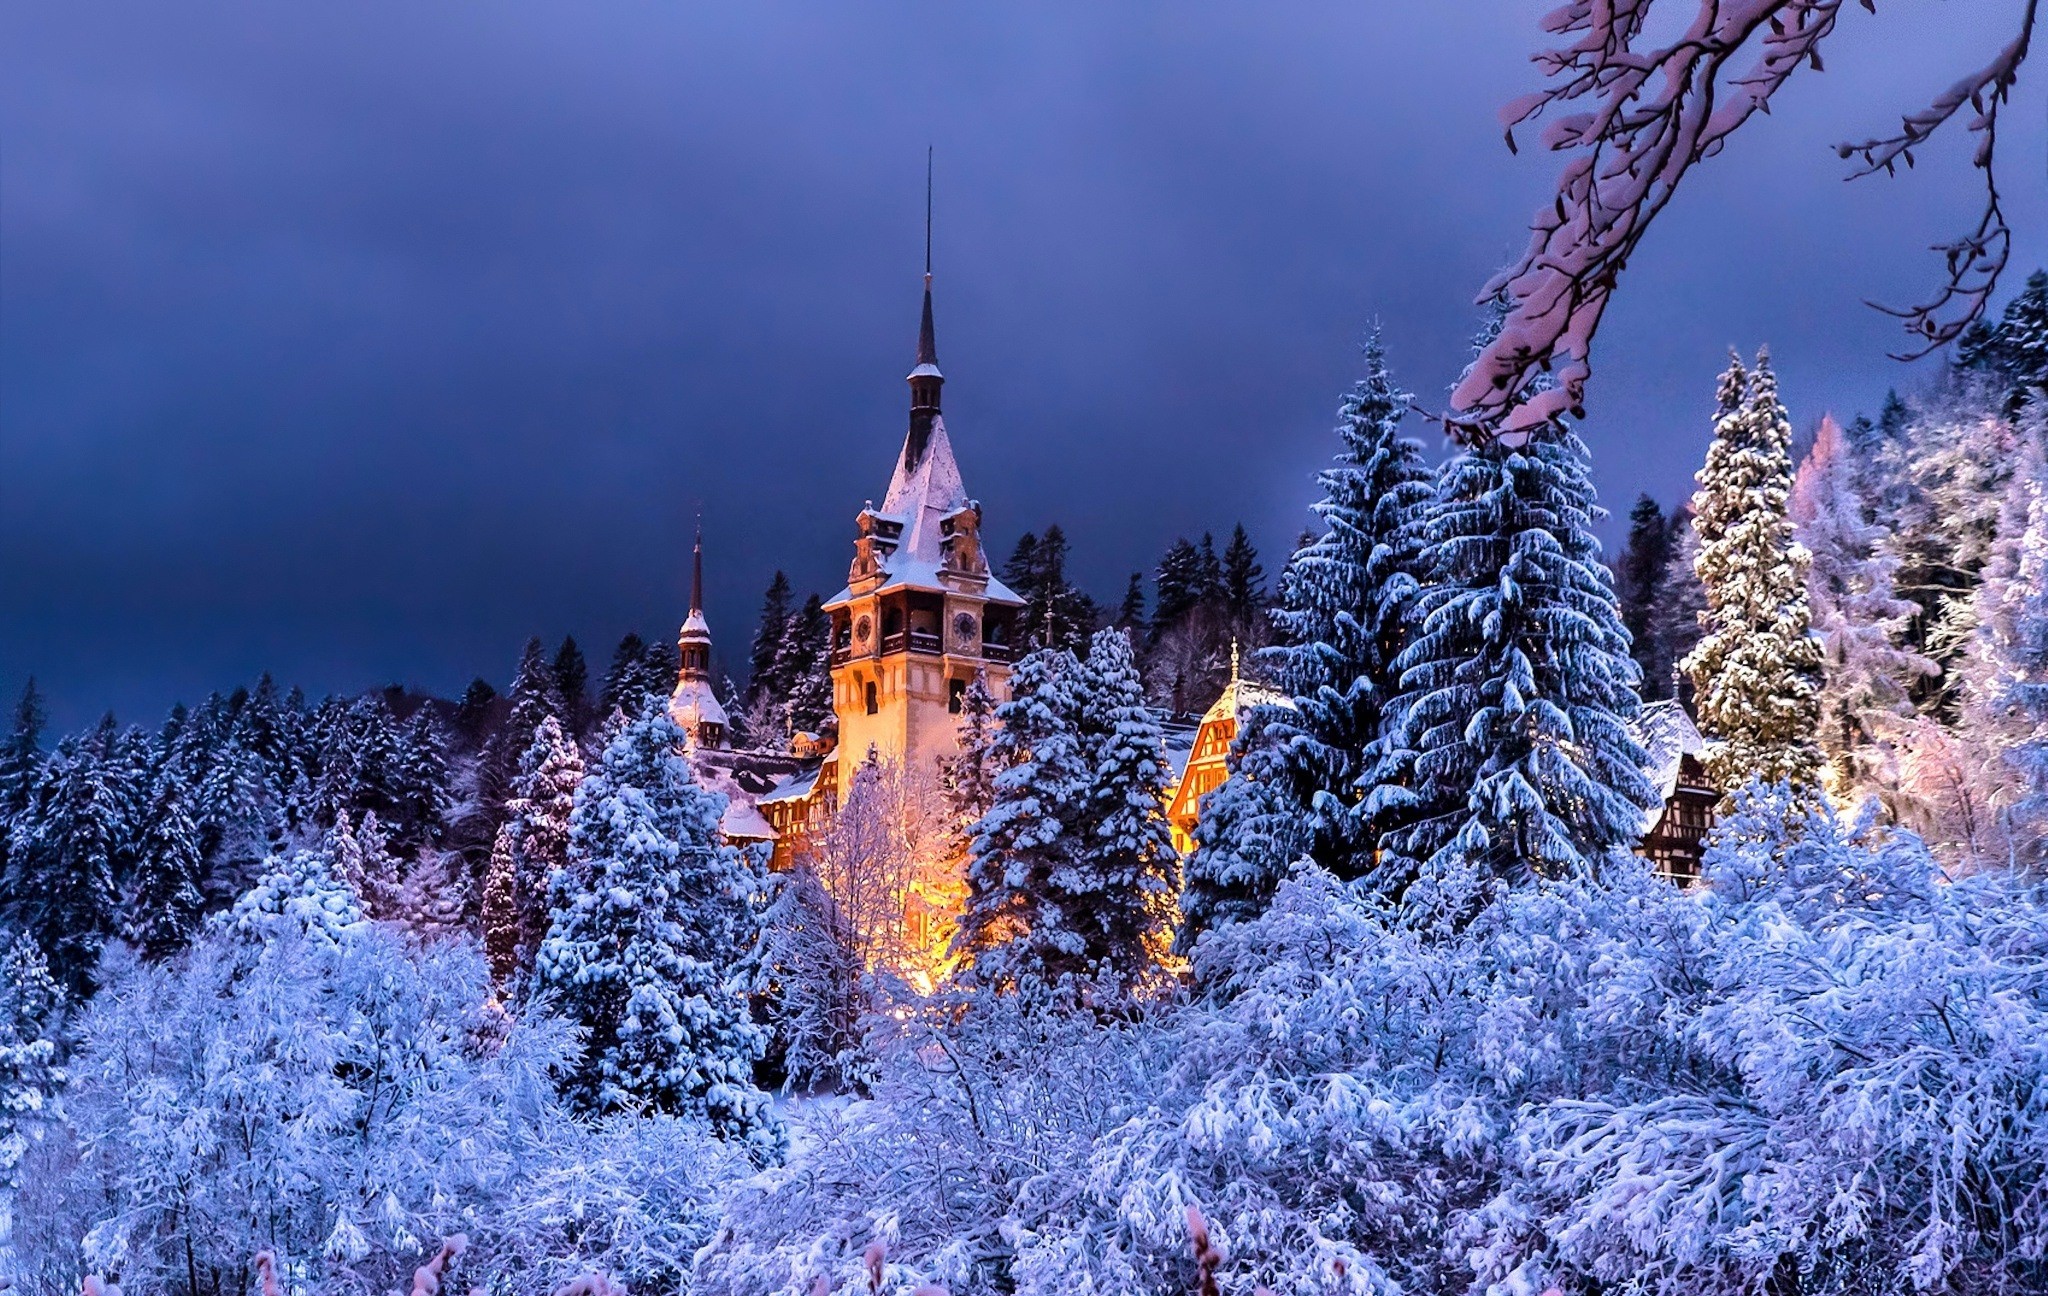 2048x1296 Wallpaper Romania, Pelesh castle, evening, winter, wood, Sinai Â» City,  nature, landscapes - Free HD Desktop Wallpapers. Backgrounds of cities and  nature